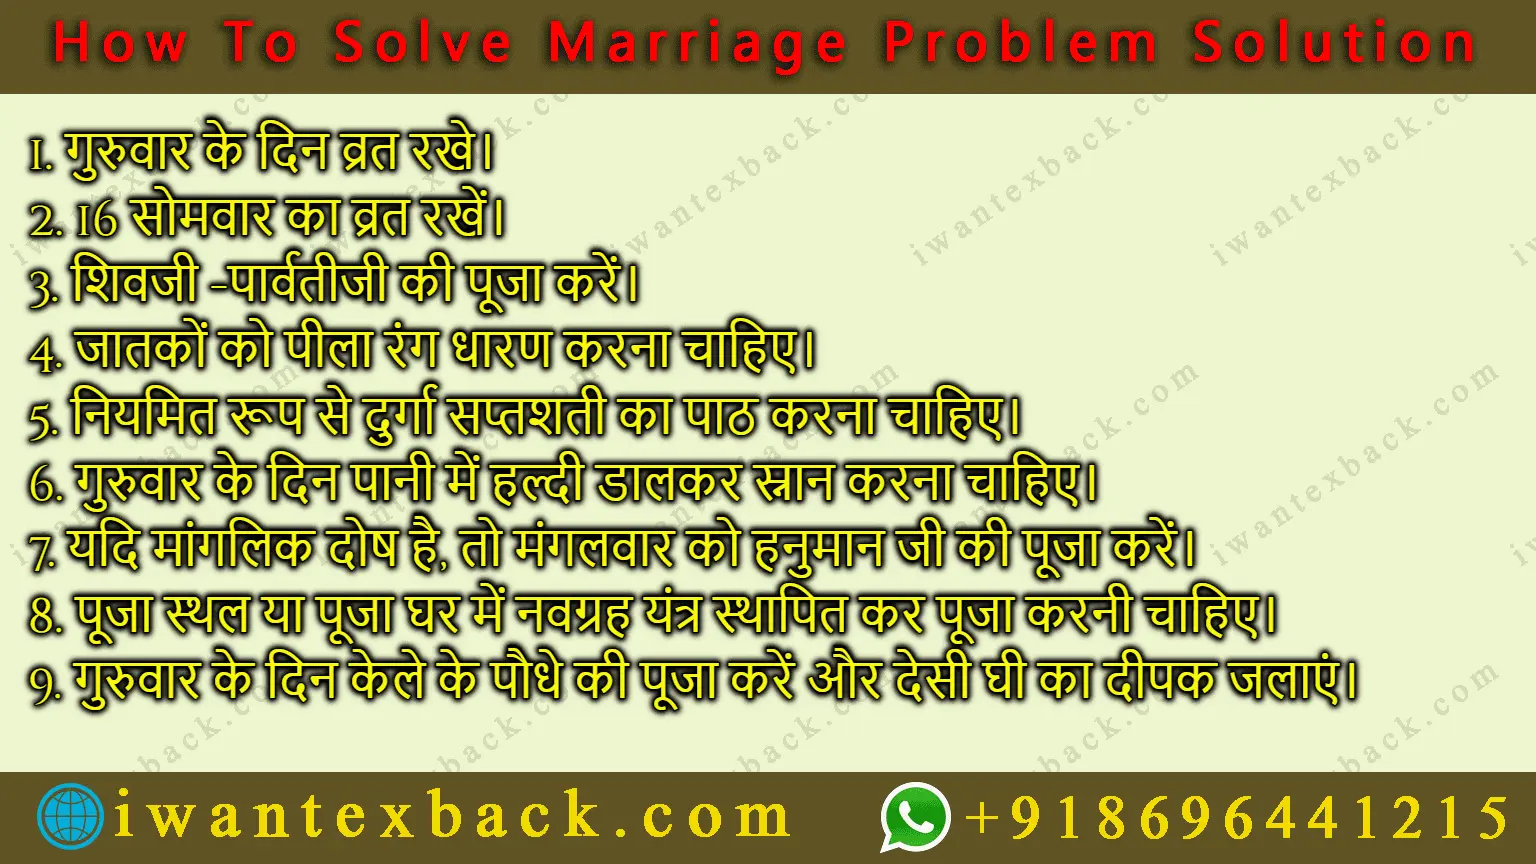 Marriage Problem Solution